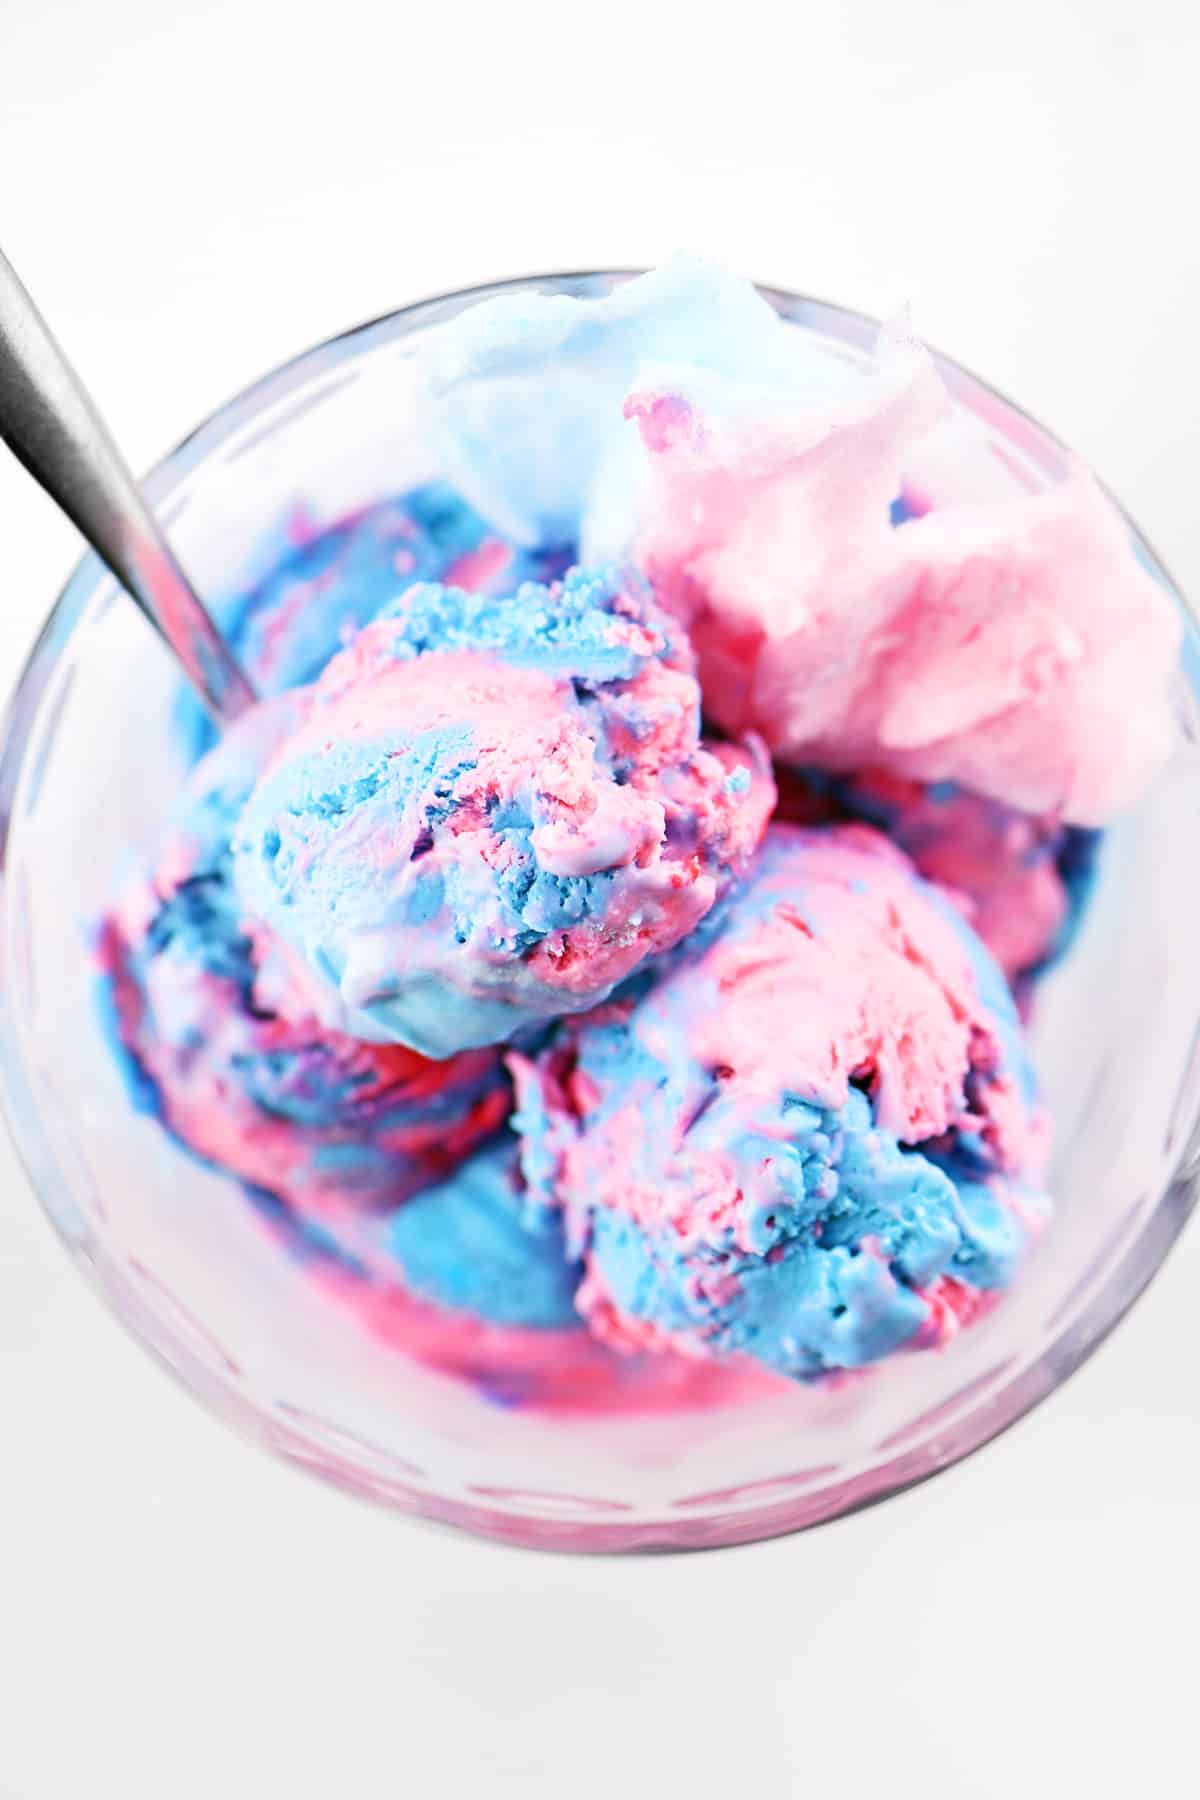 Cotton candy ice cream in a glass dish.